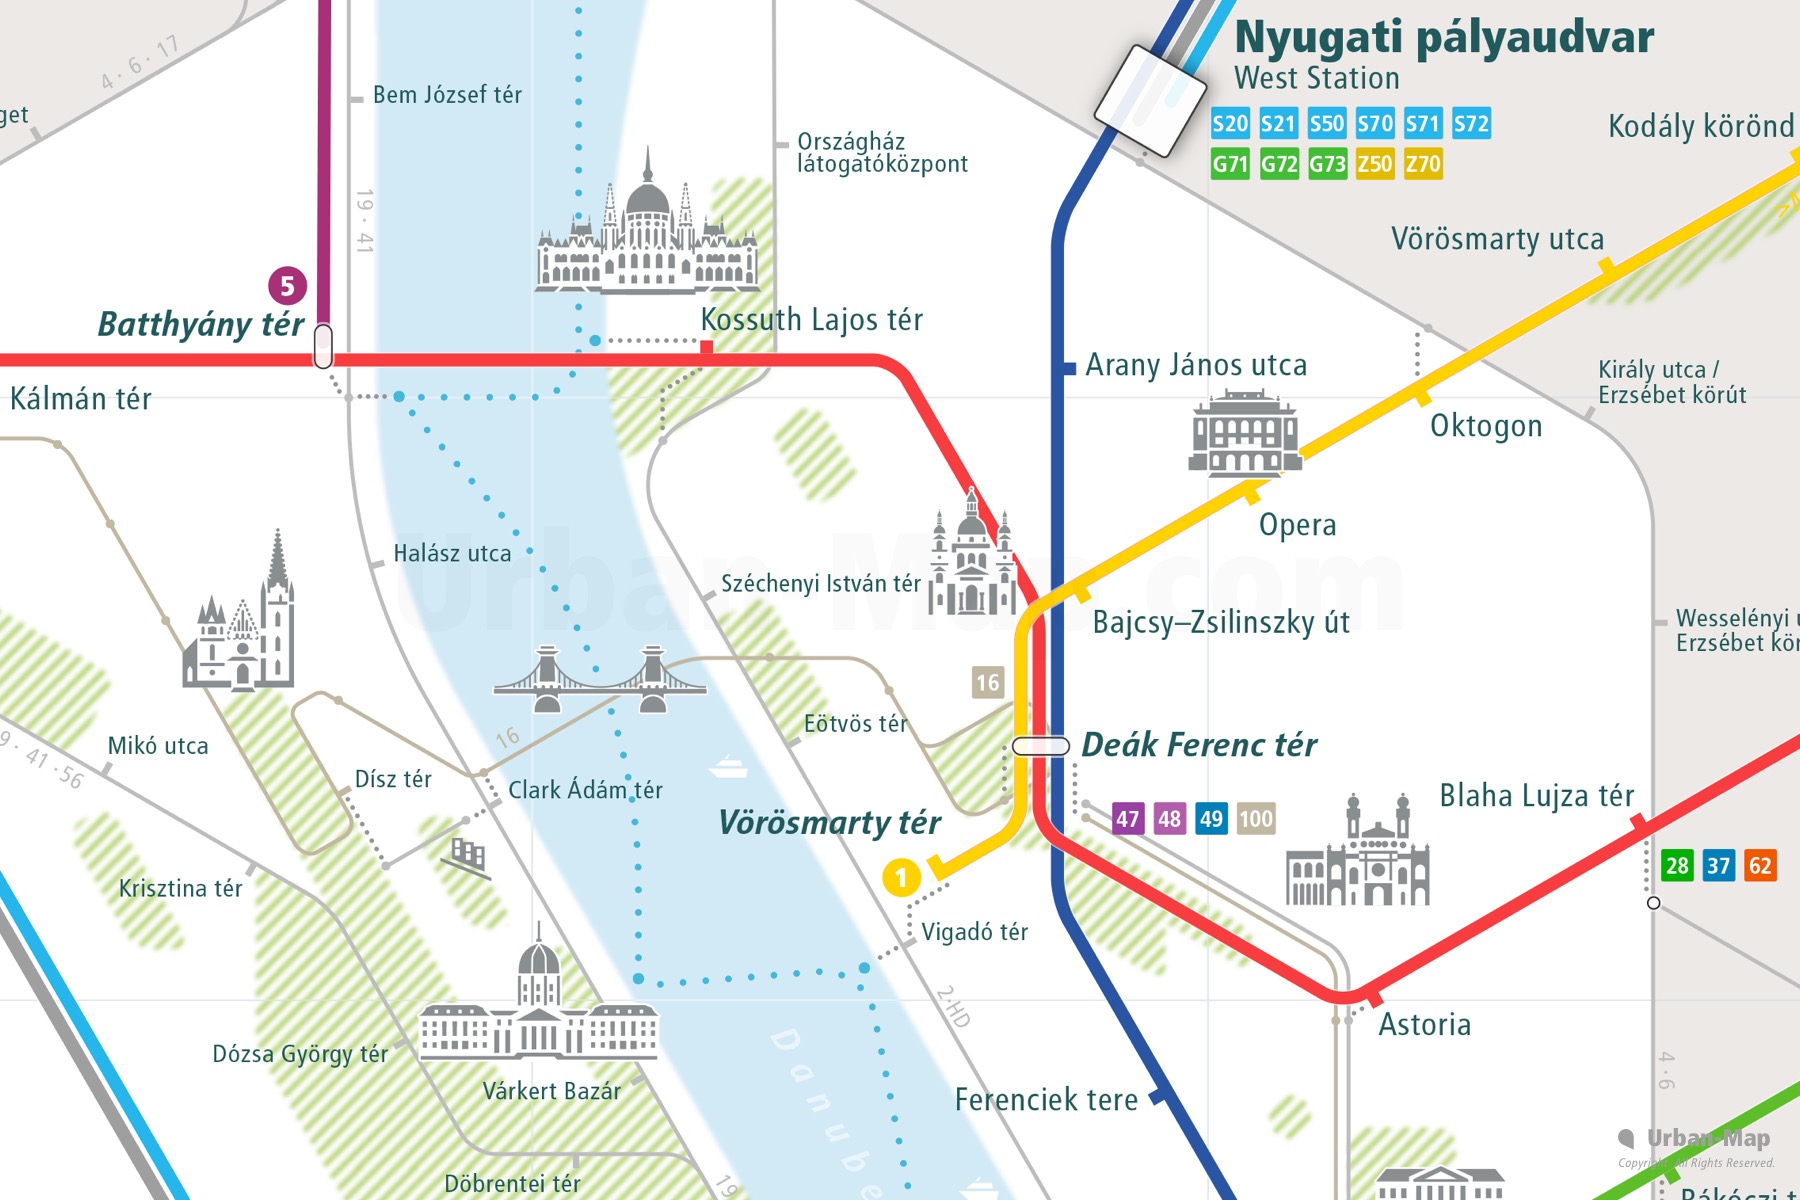 Budapest City Rail Map shows the train and public transportation routes of metro, tram, ferry, funicular - Close-up